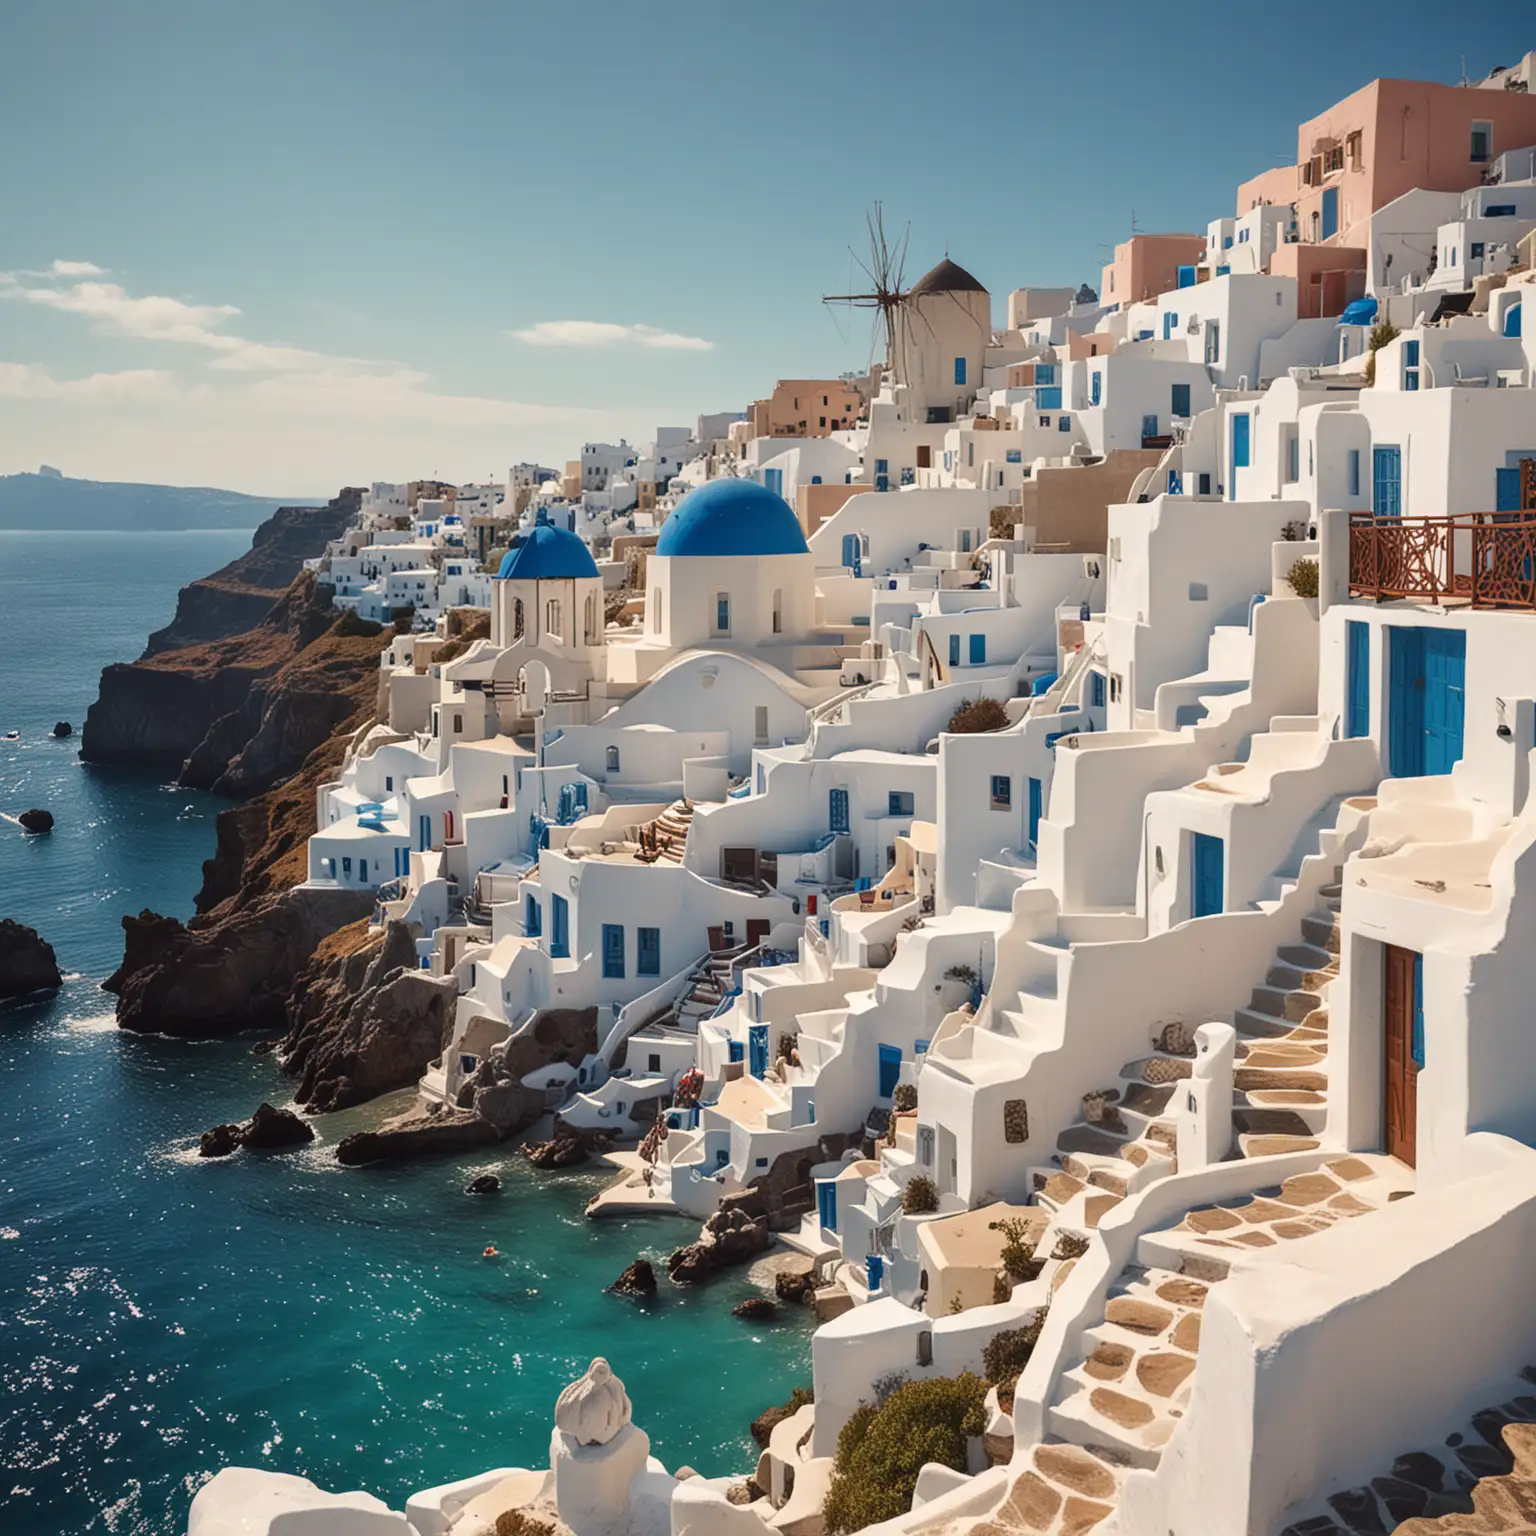 Can you create an image for an album's cover 3000 x 3000 pixels for a Dance-Pop song called Magic to the Sea, which is very much inspired from the Mediterranean (think Santorini, Mykonos etc)?